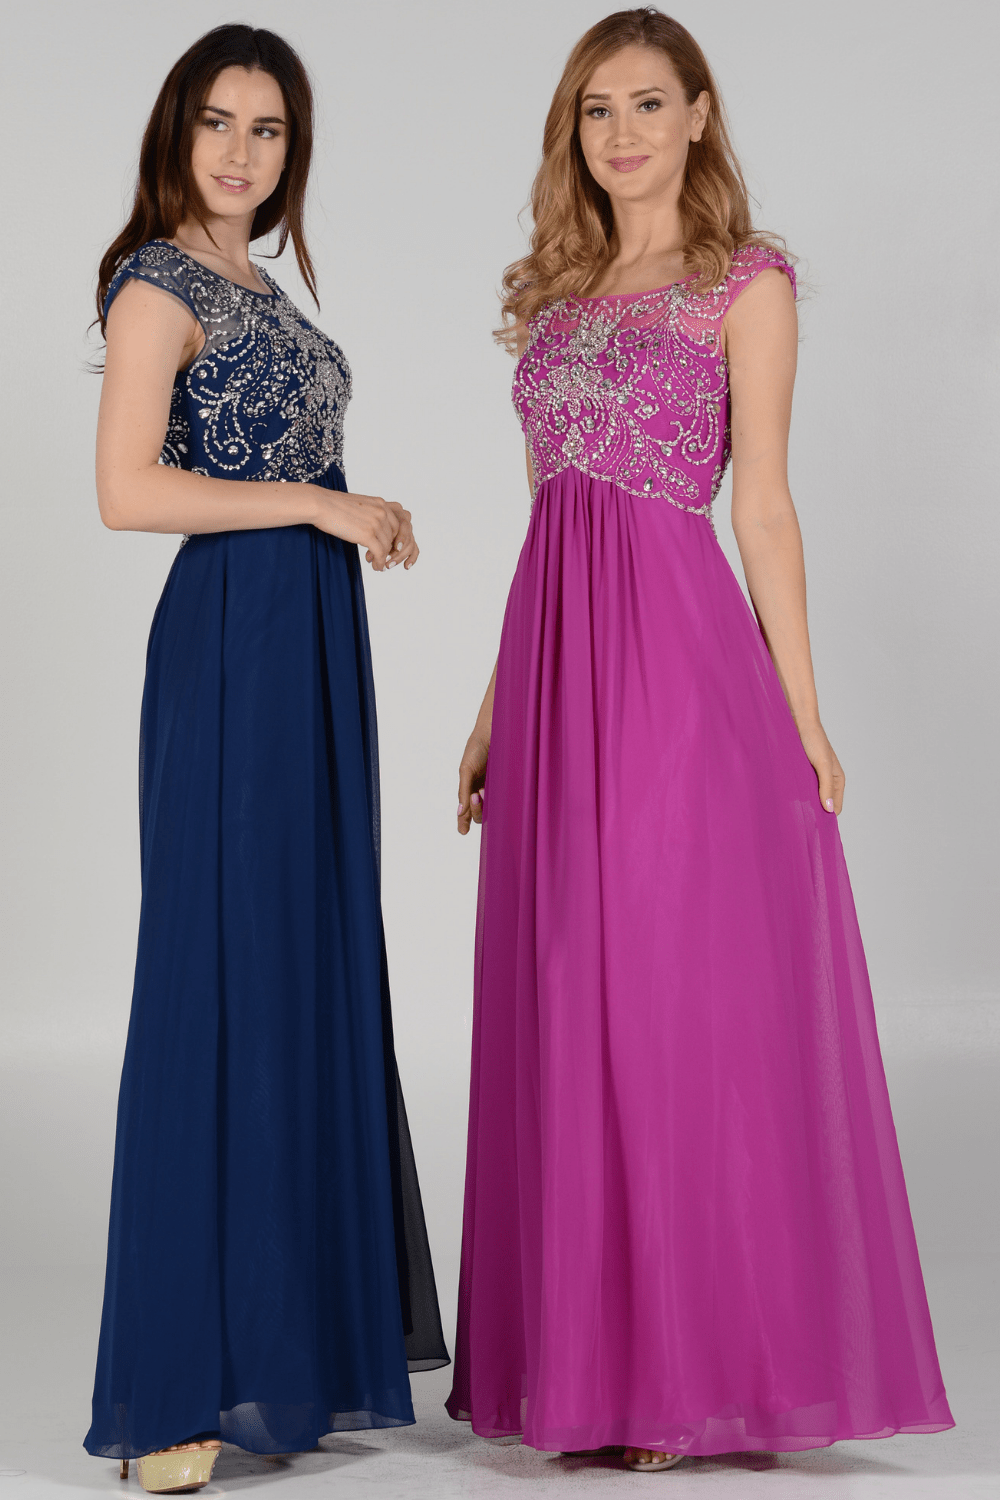 Long Cap Sleeve Dress with Jeweled Bodice by Poly USA 7122